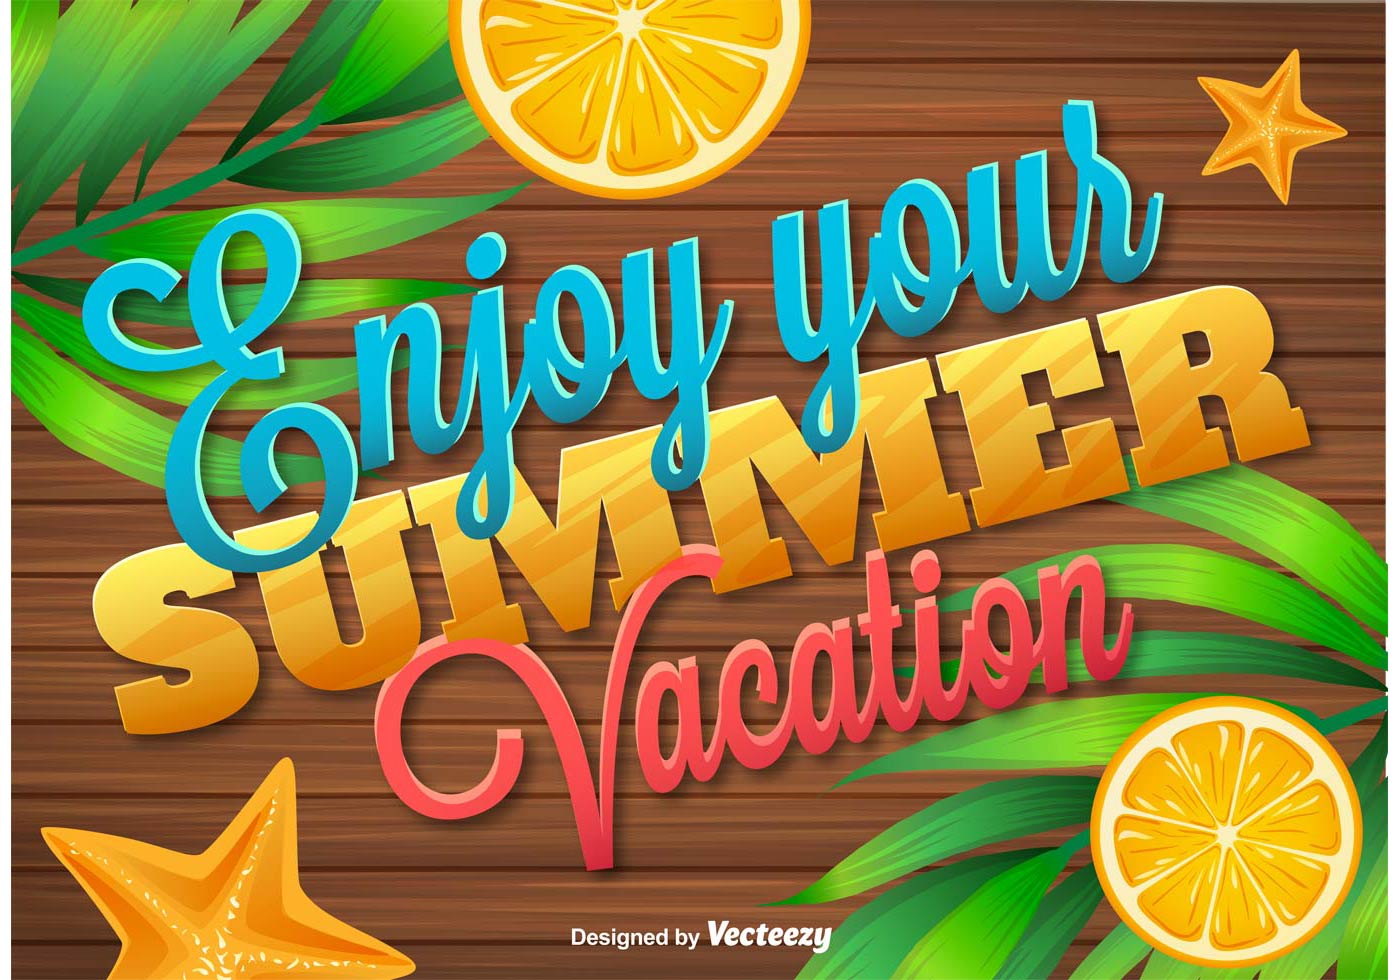 Last day of Classes is Tuesday, June 28!!  Have a wonderful summer!!  Grade 1-6 return on Sept. 1!  Pre K on Sept 13 & Kindergarten has a meet and greet Sept. 1.